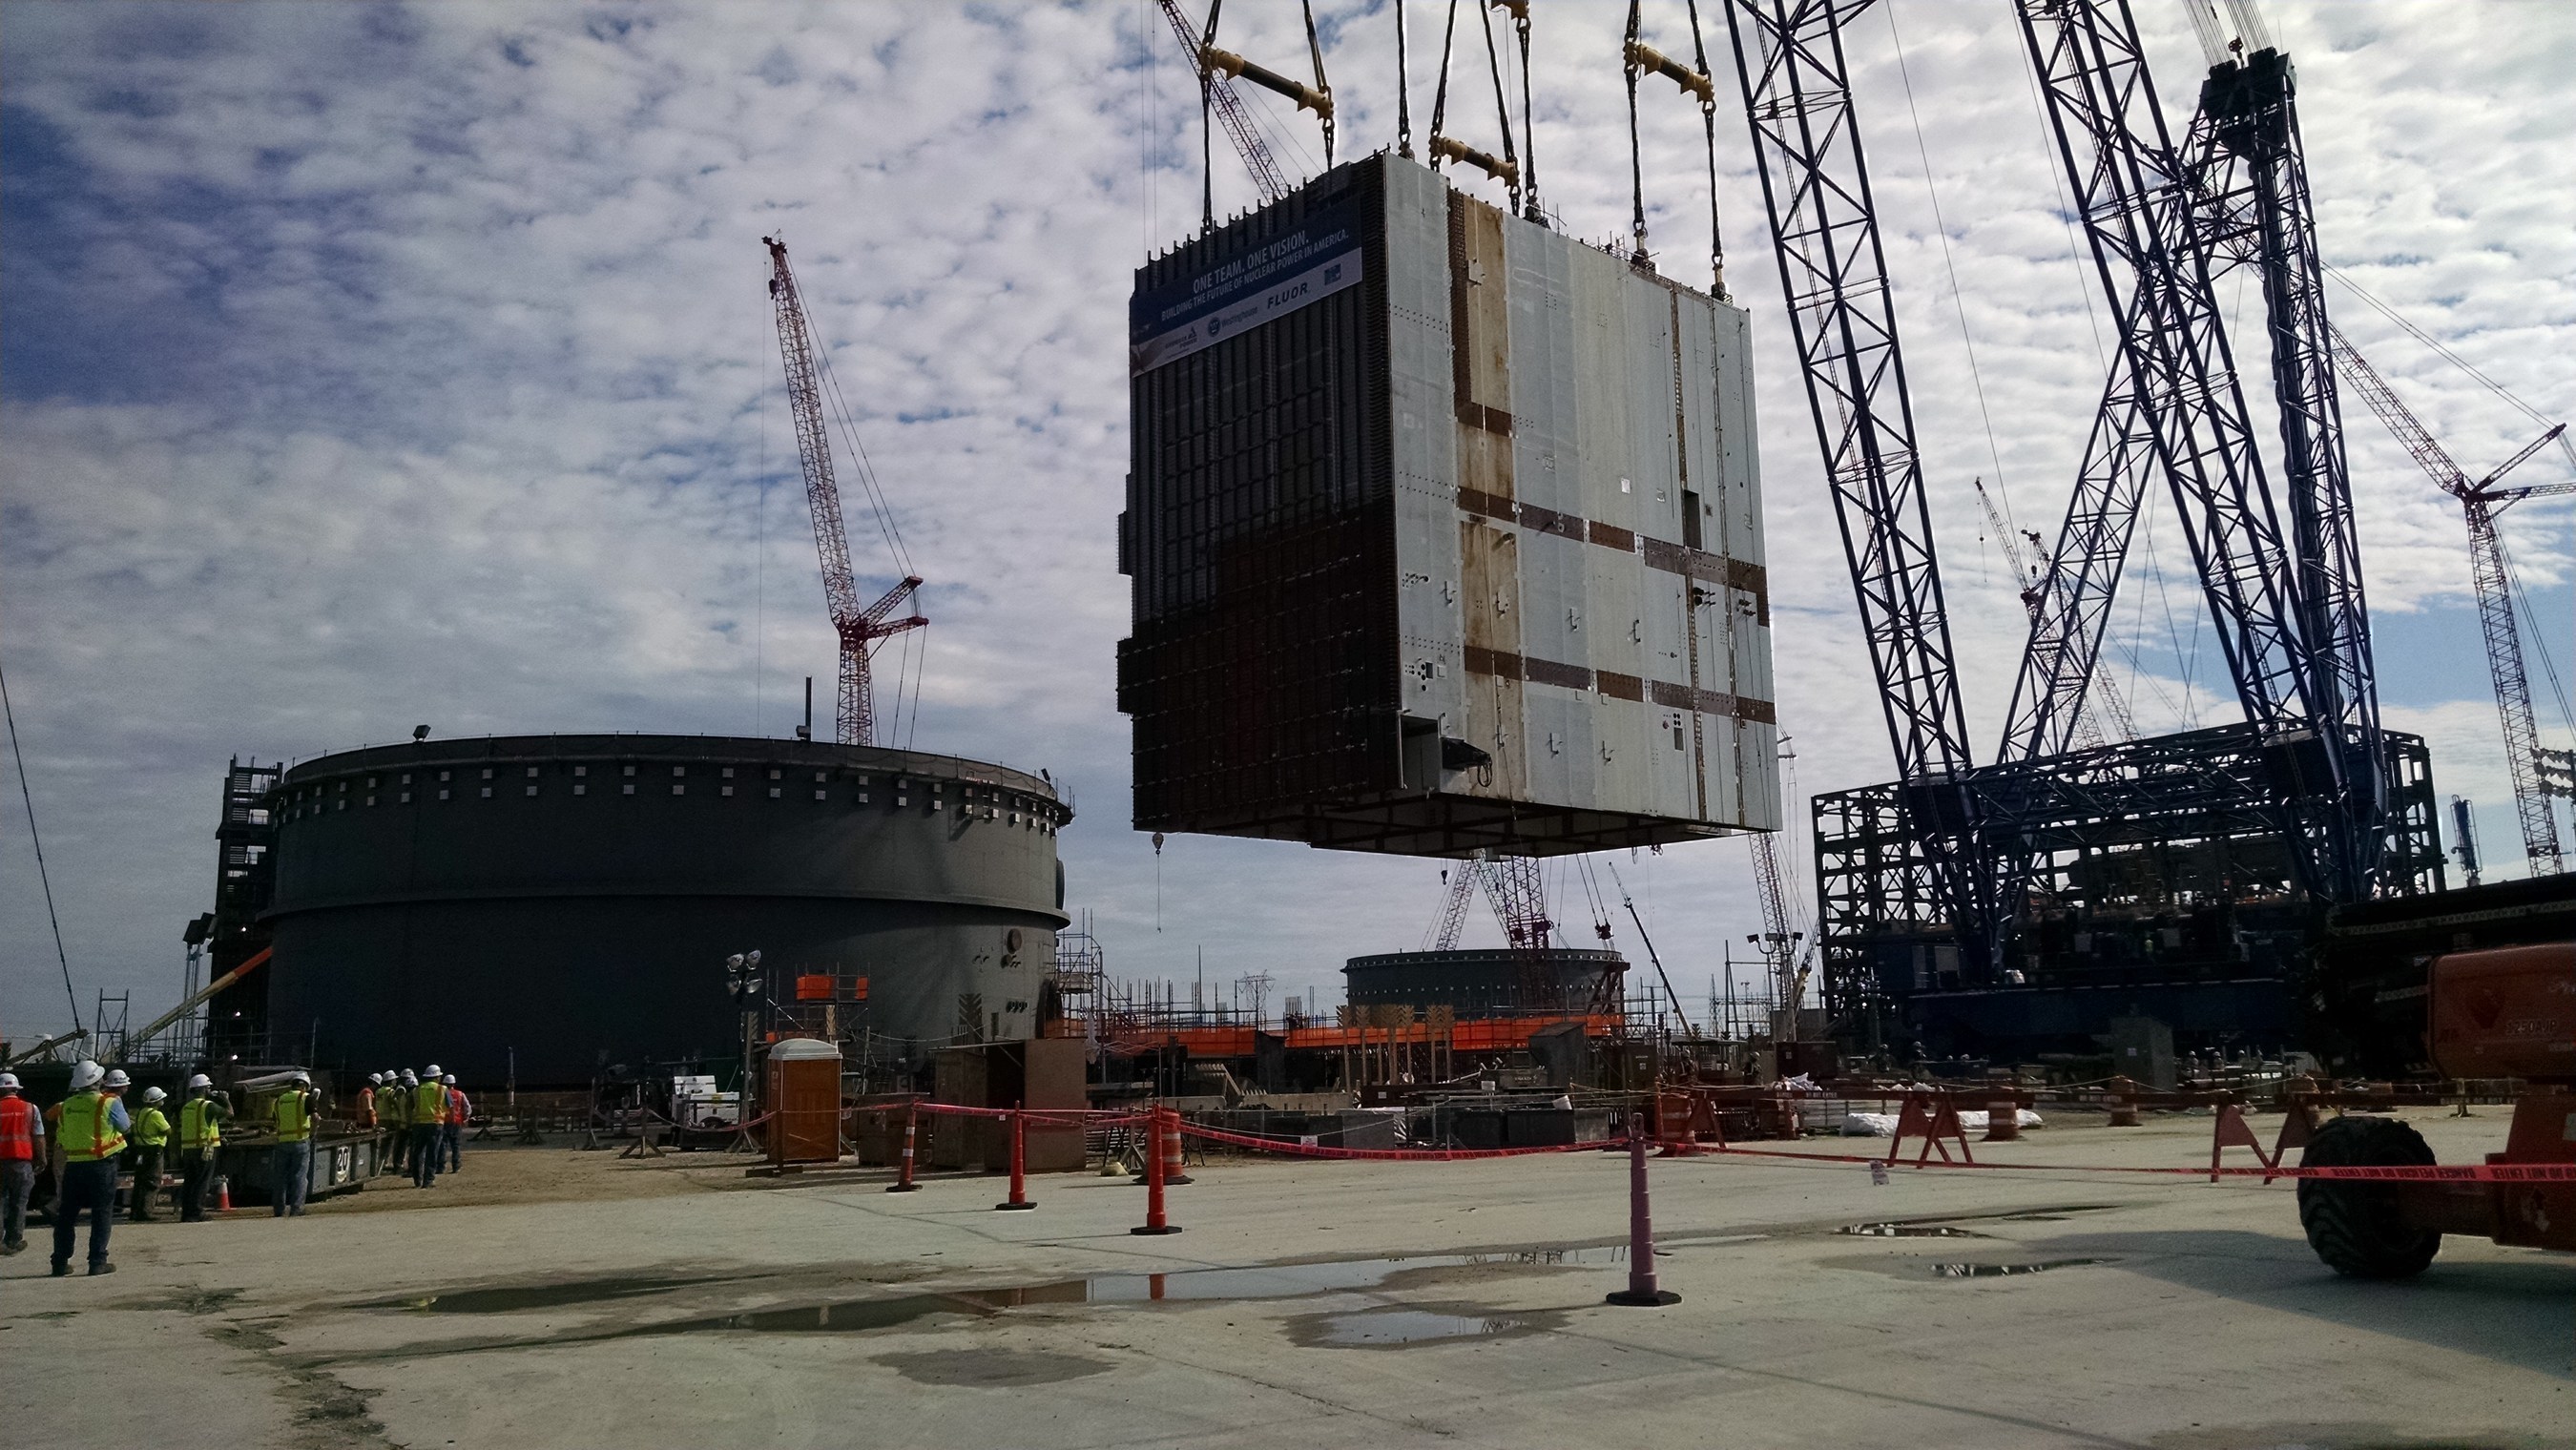 On Saturday, Aug. 20, the project team at the Vogtle nuclear expansion near Waynesboro successfully placed the CA20 module into the Unit 4 nuclear island. With a footprint of approximately 67 feet long by 47 feet wide, the critical module will house various plant components, including the used fuel storage area.